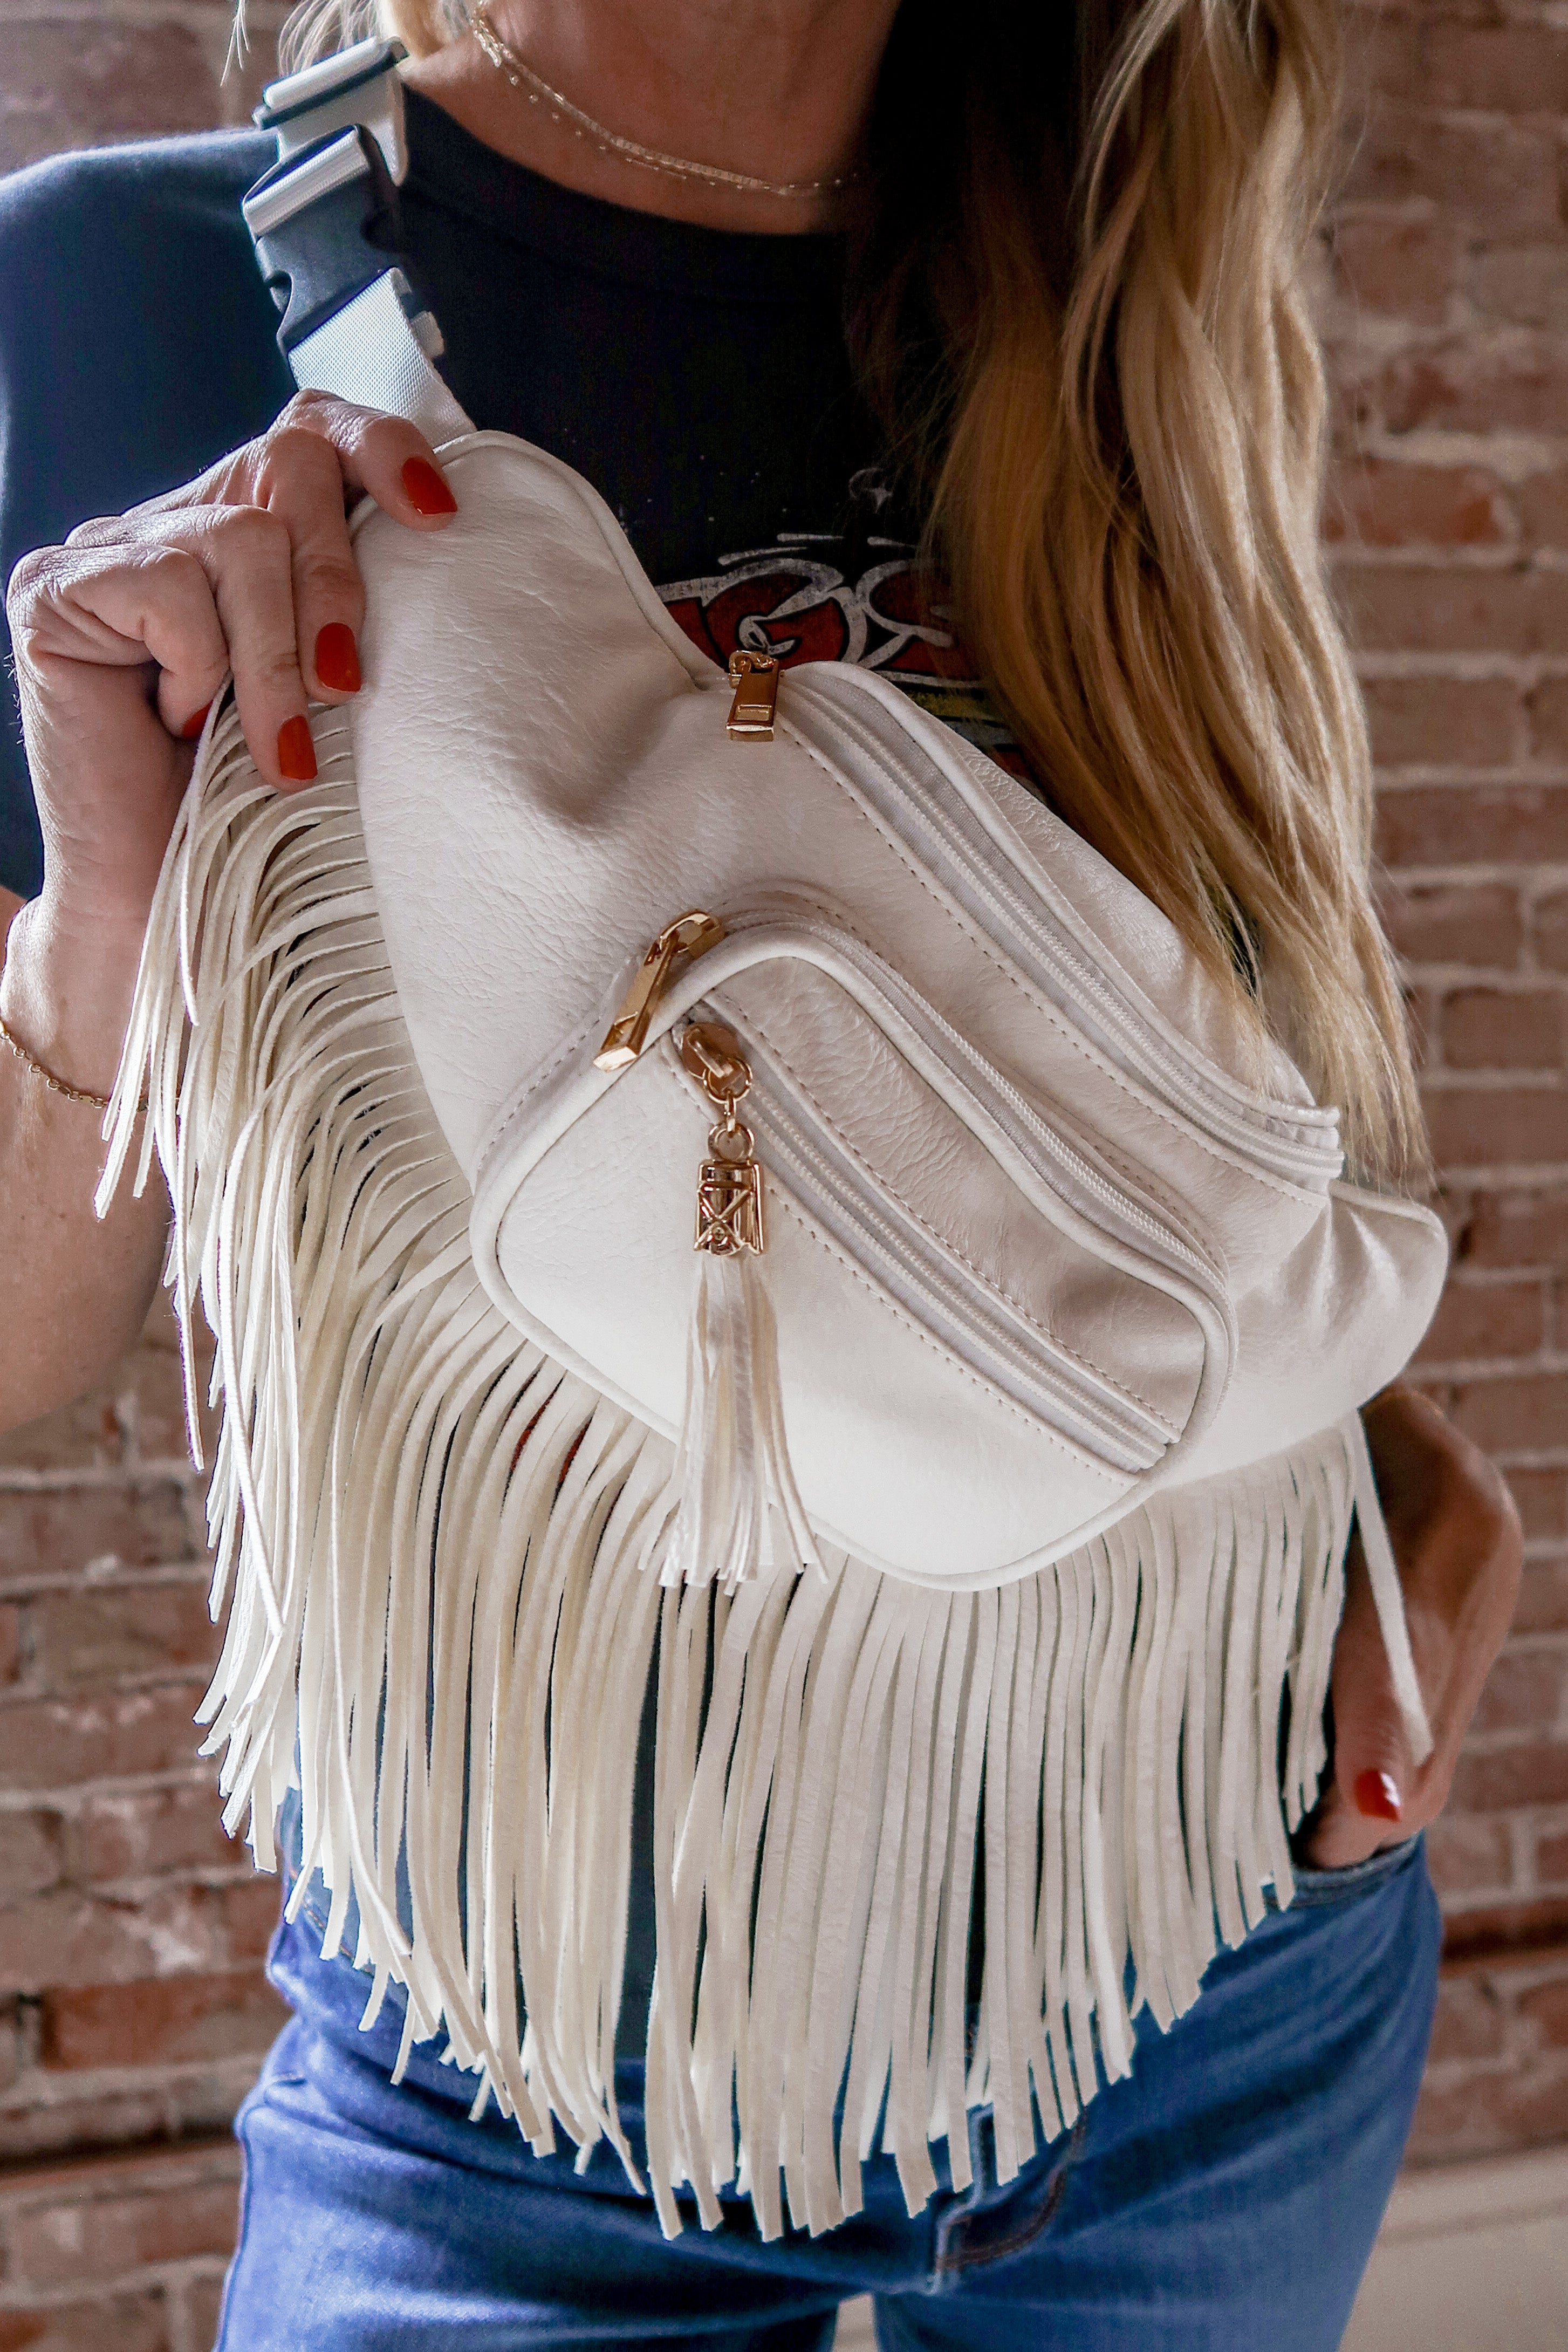 Right On Cue Fringe Crossbody In White • Impressions Online Boutique